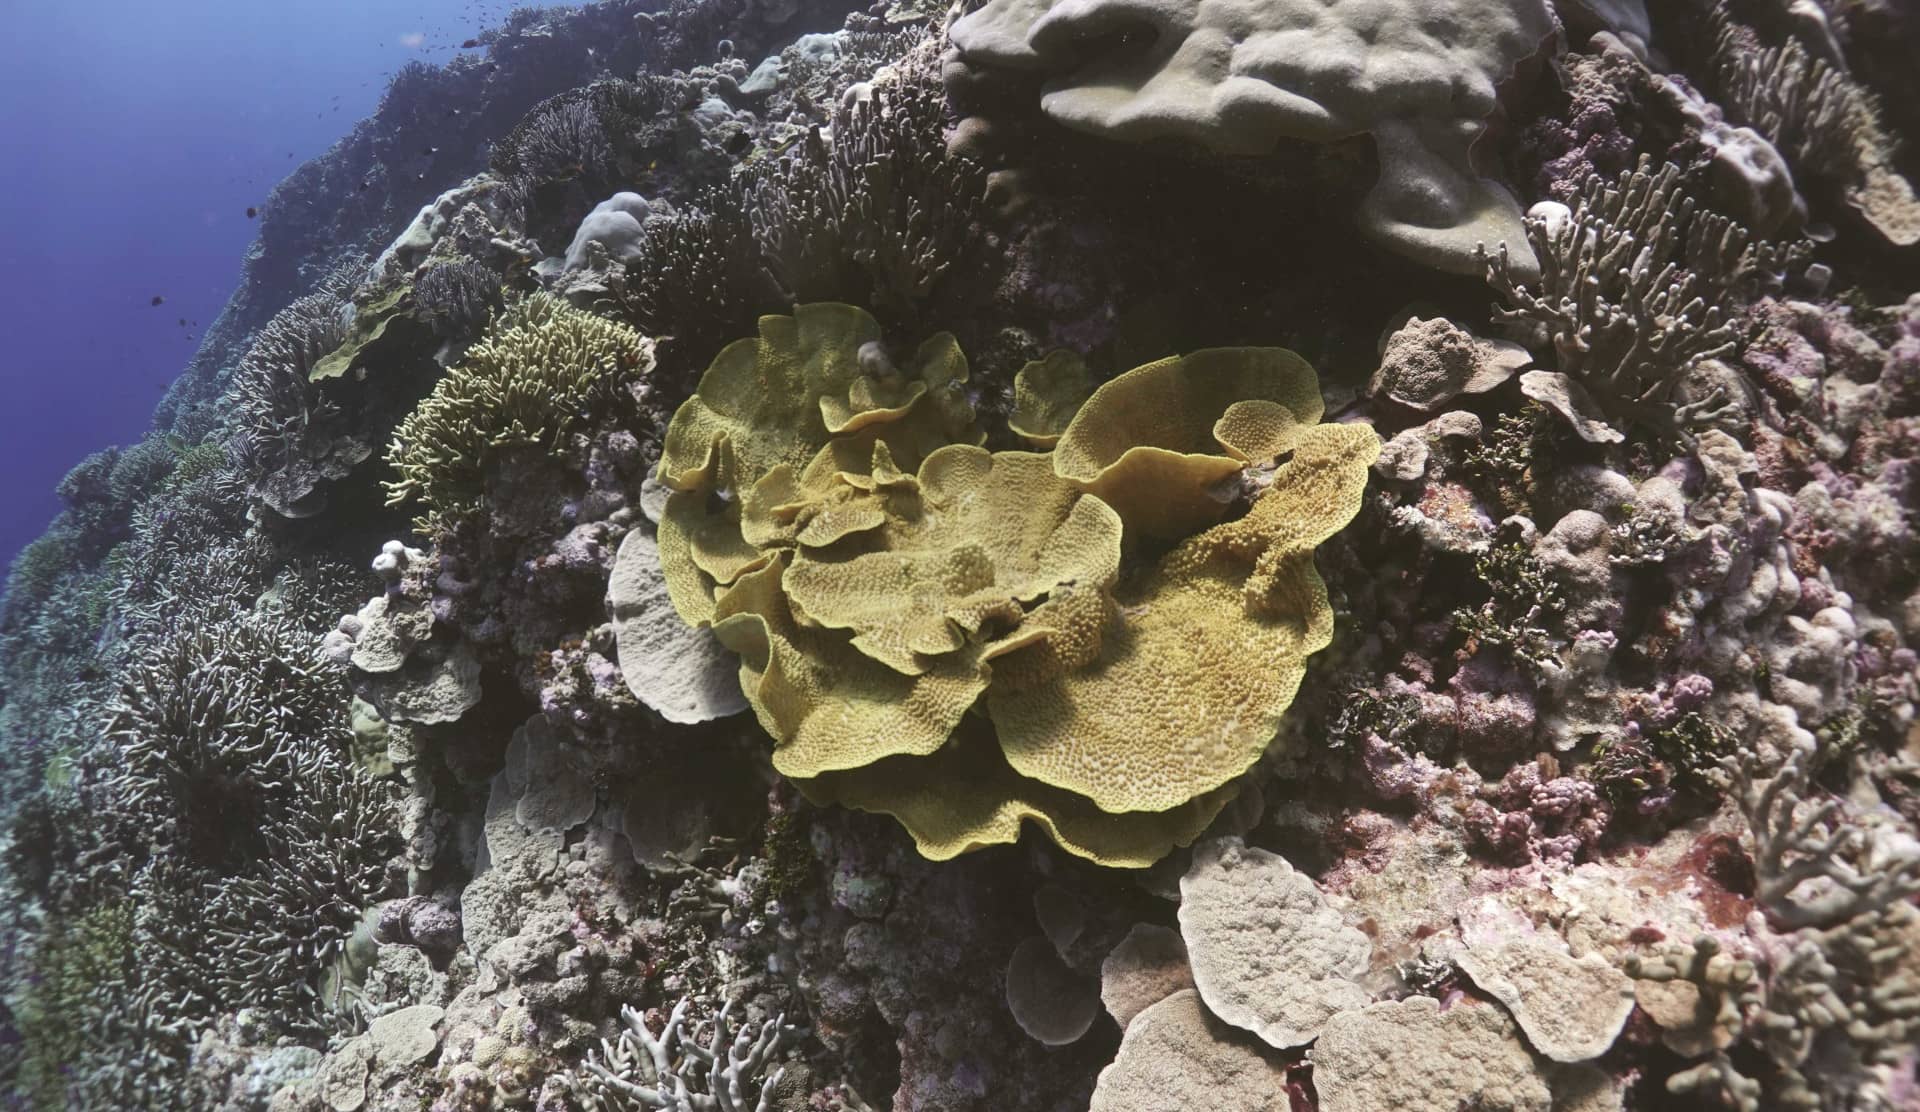 Lettuce coral in a reef off of Pingelap Atoll in Pohnpei